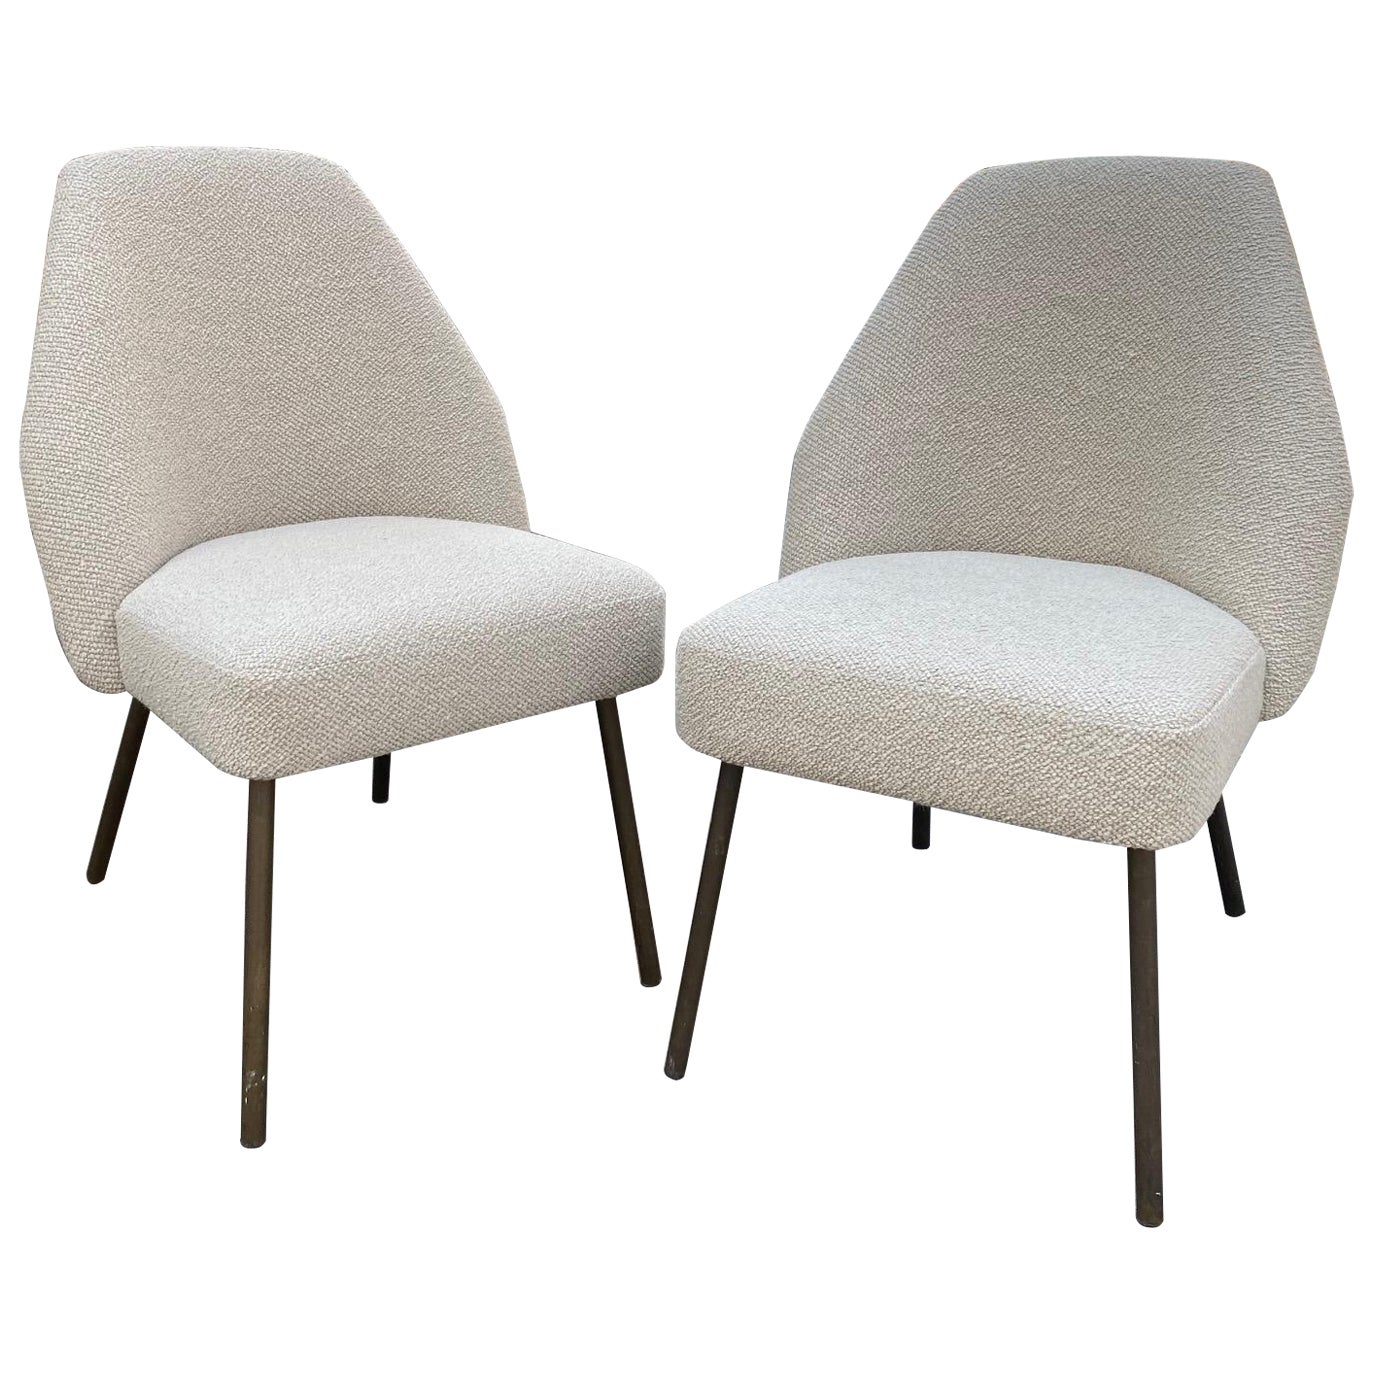 Pair of Campanula Chairs by Carlo Pagani for Arflex, Italy, 1950s